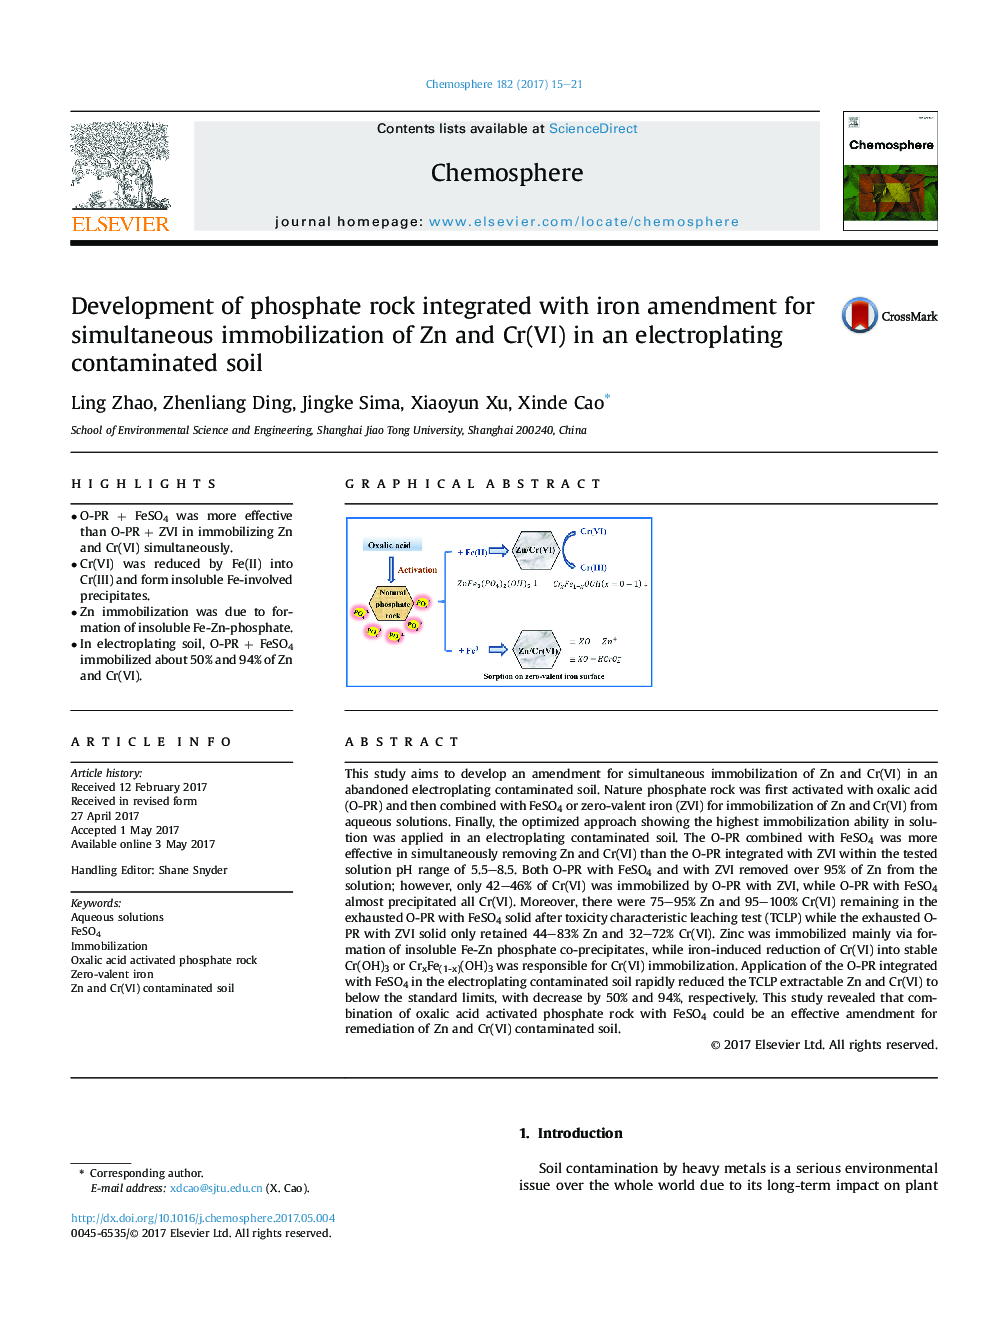 Development of phosphate rock integrated with iron amendment for simultaneous immobilization of Zn and Cr(VI) in an electroplating contaminated soil